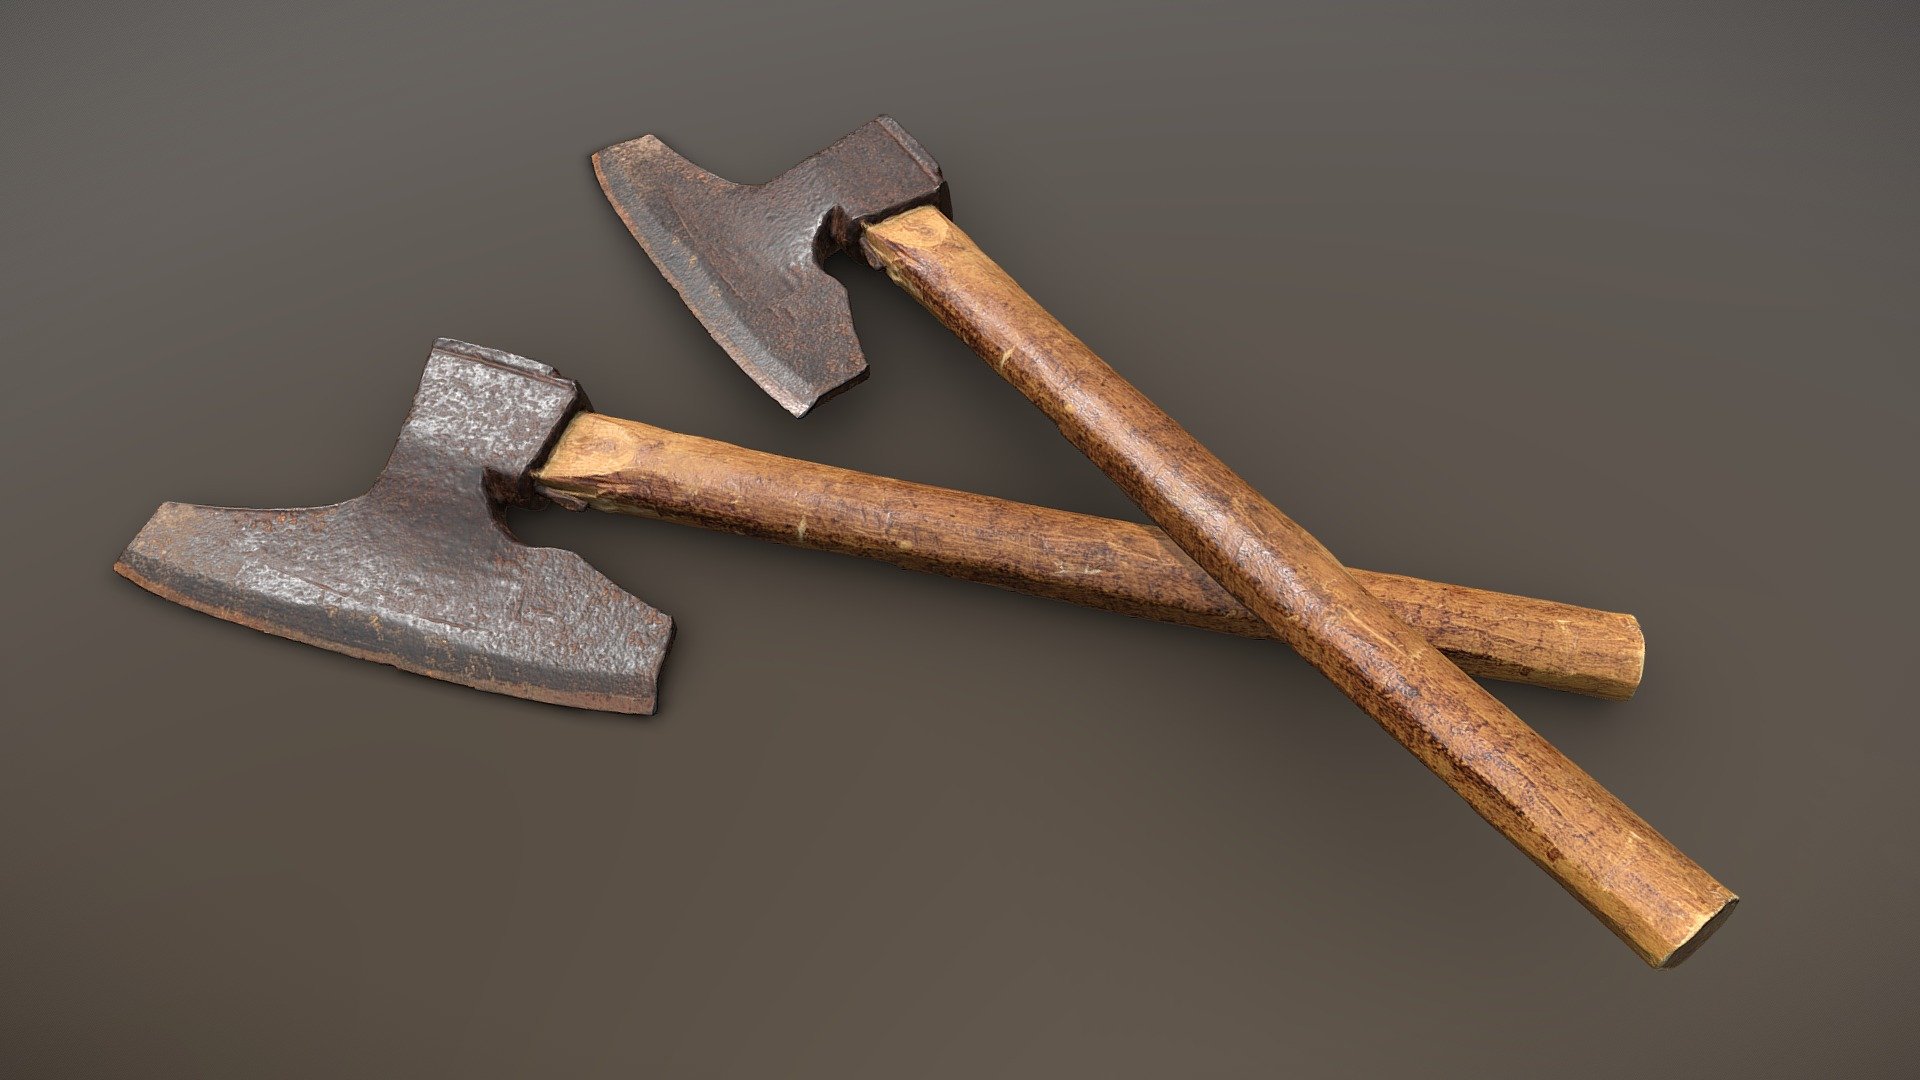 A realistic model of a rusty old axe that was textured using a PBR workflow, based on photogrammetric data and cleaned up and retextured for a more detailed look.

Special thanks to Gustavsbergs Auktionskammare (https://gustavsbergsauktionskammare.se/) for their support and their excellent inventory of auction items to browse 3d model